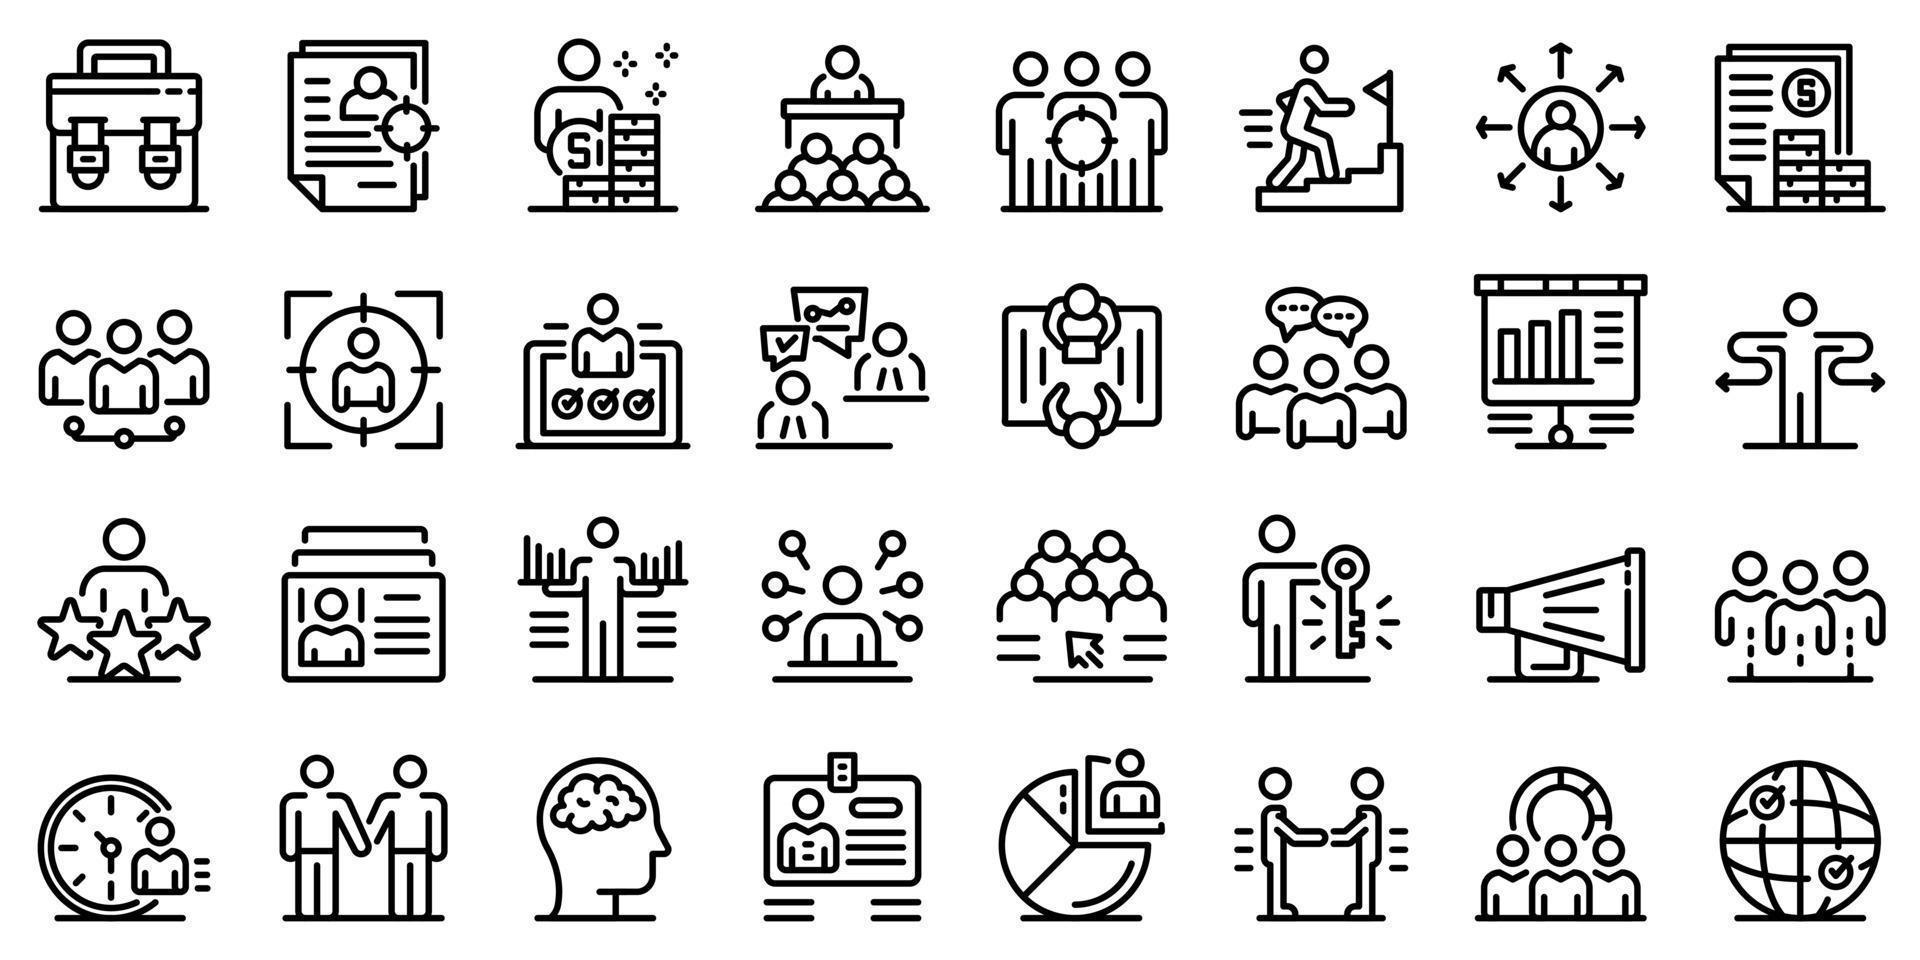 Recruiter icons set, outline style vector